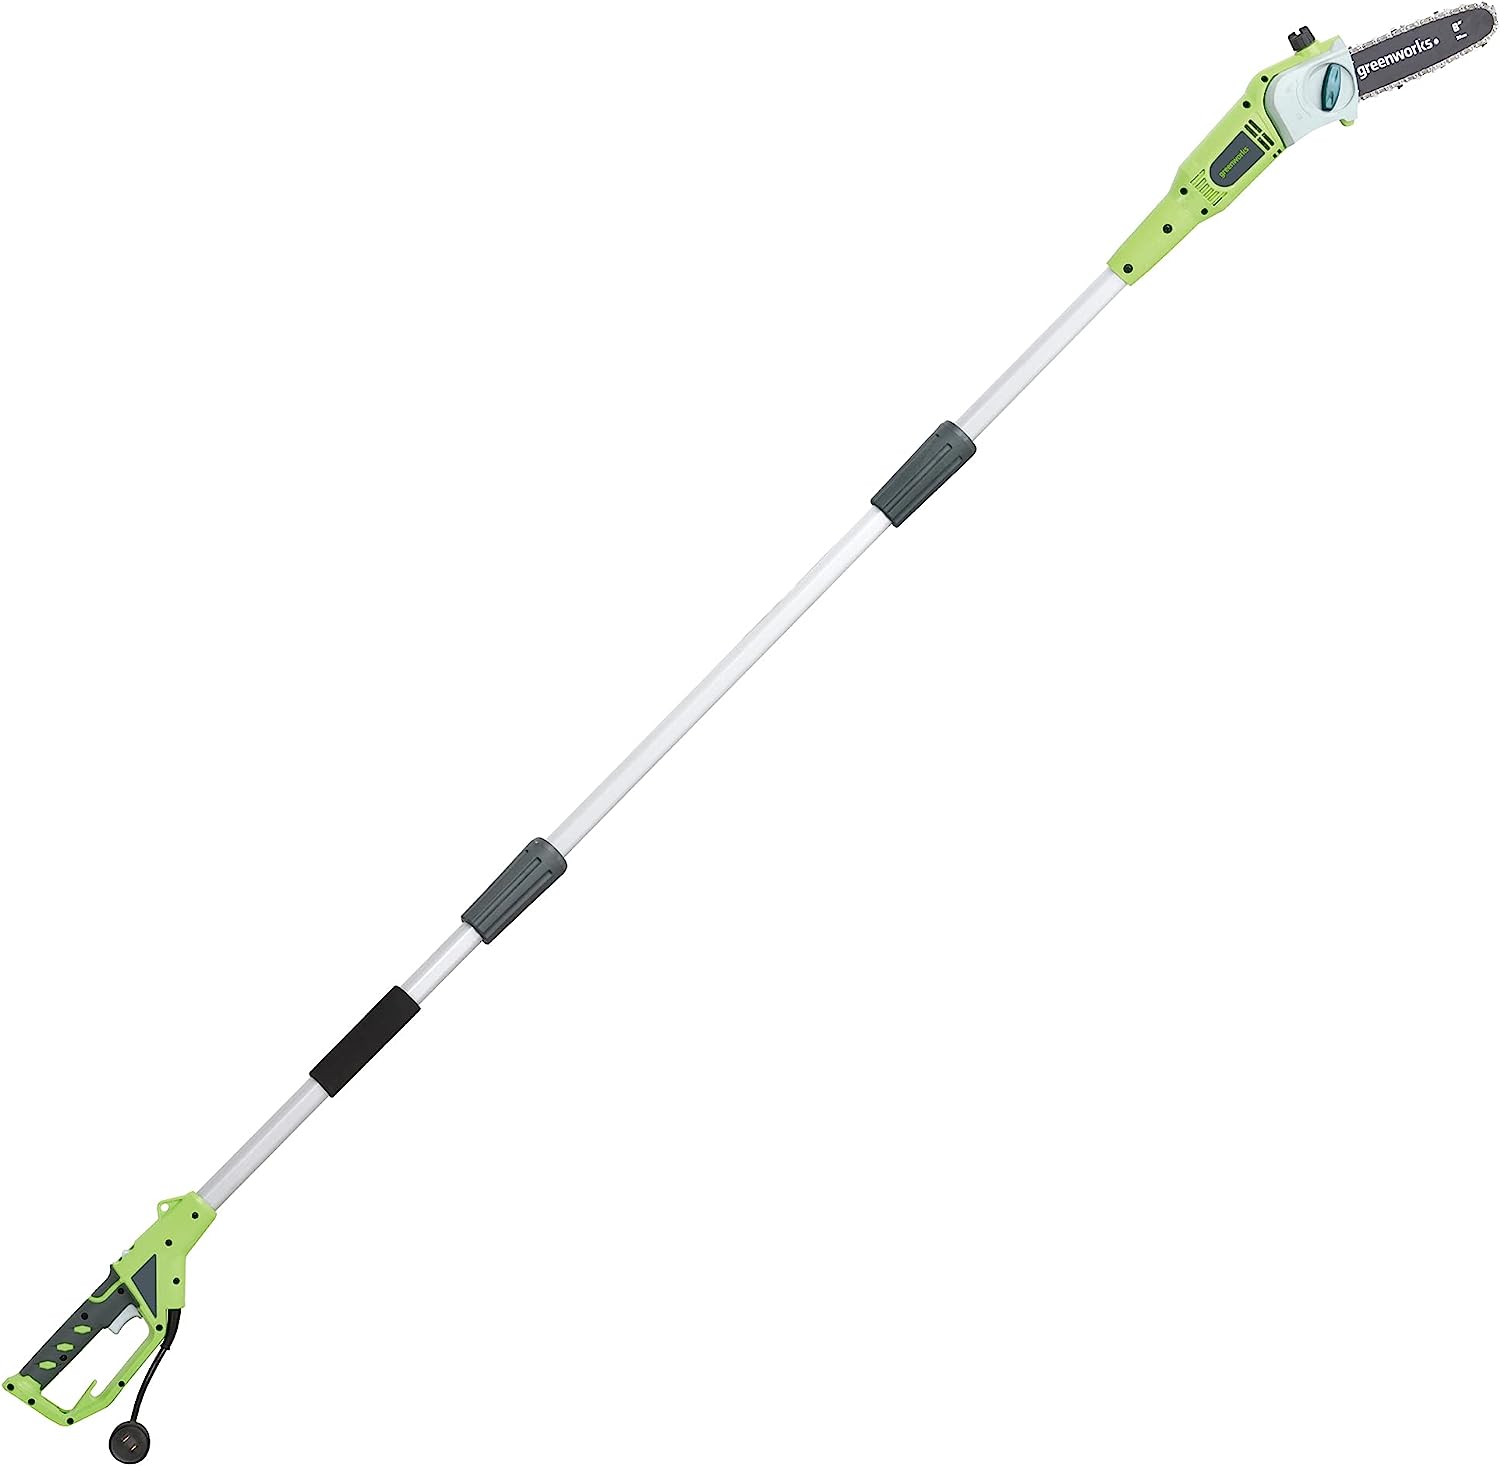 Greenworks 6.5 Amp 8 inch Corded Electric Pole Saw